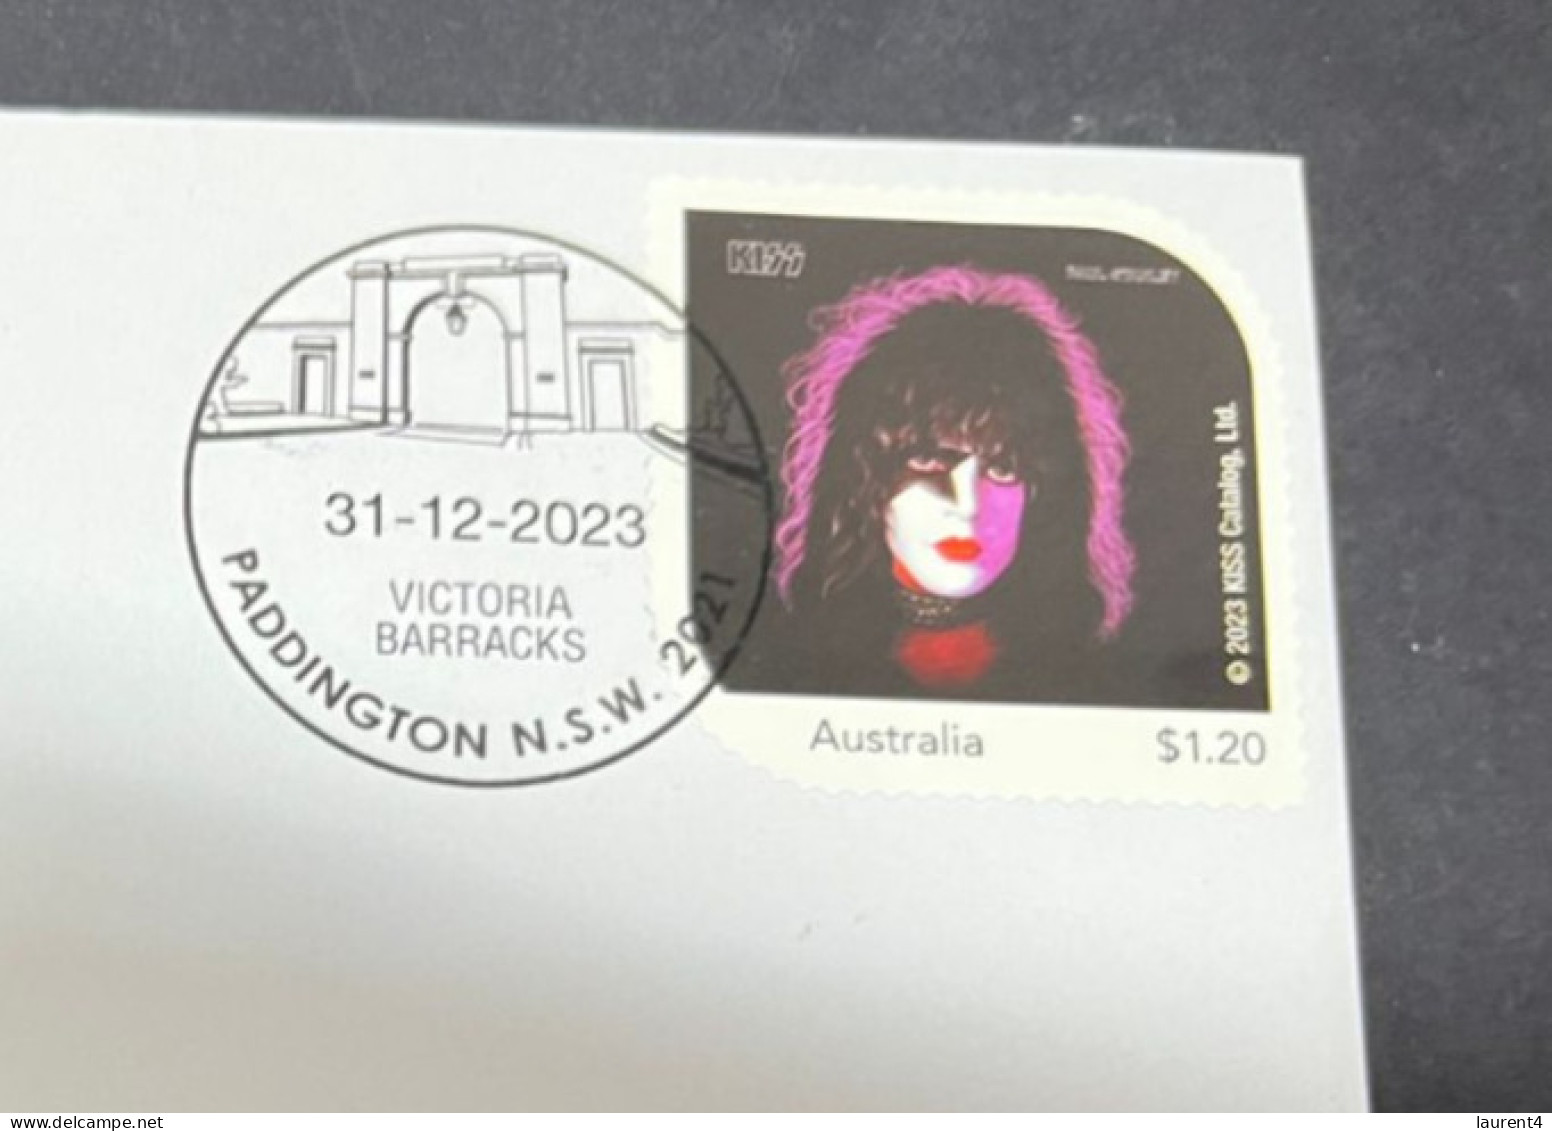 26-3-20234 (4 Y 8) Kiss (music Band) With KISS OZ Stamp (Paul Stanley) - Musique